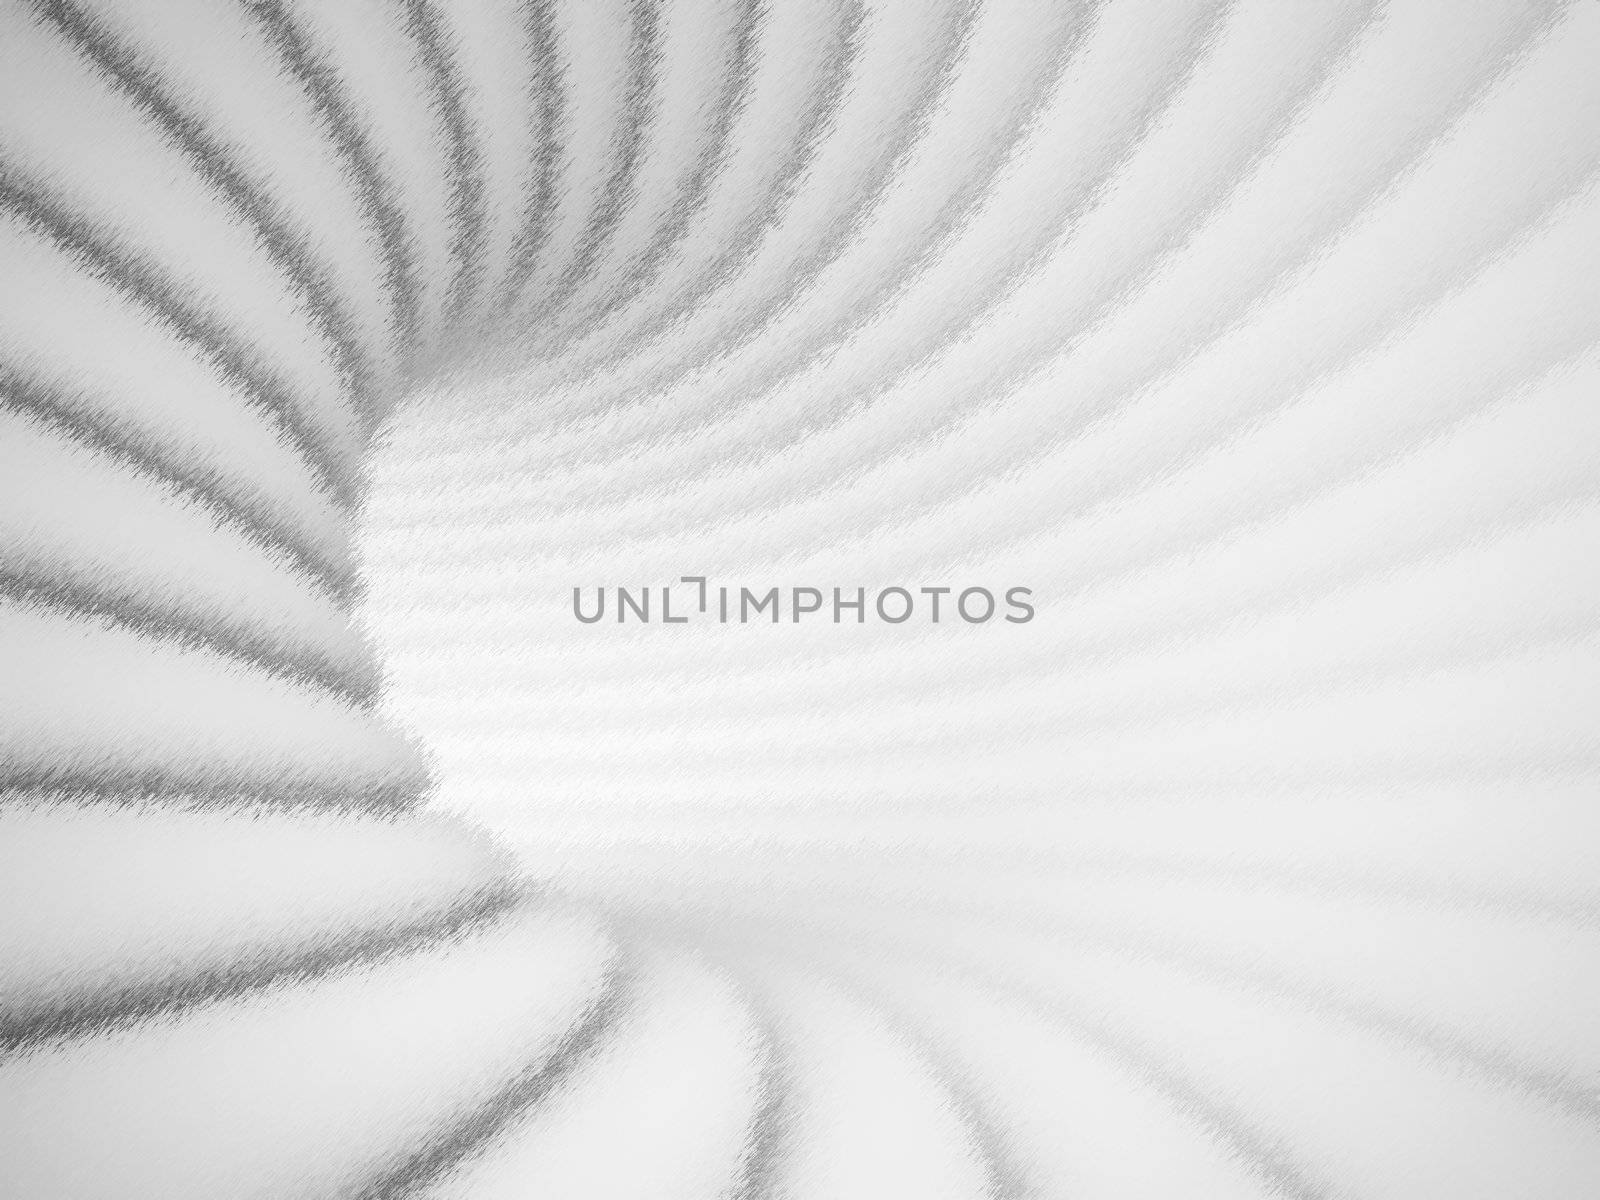 3d Illustration of White Abstract Background or wallpaper